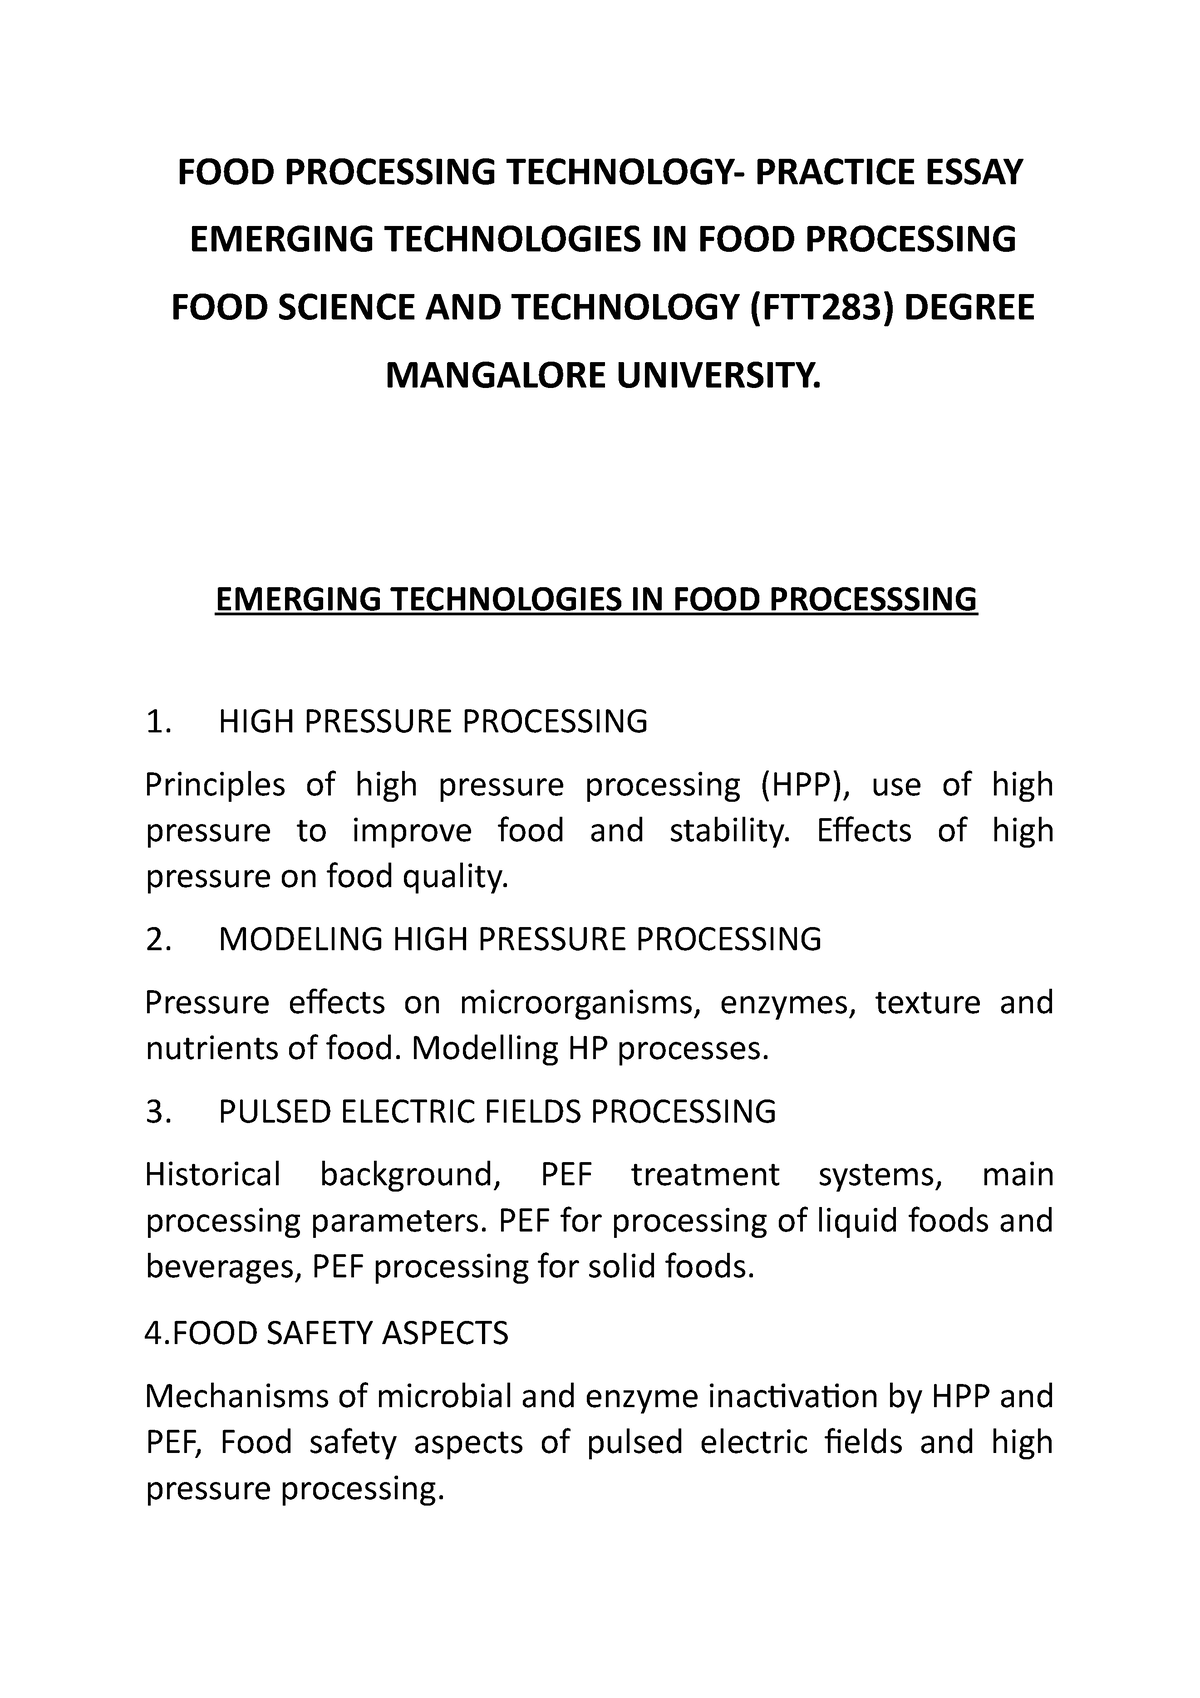 research papers on food technology